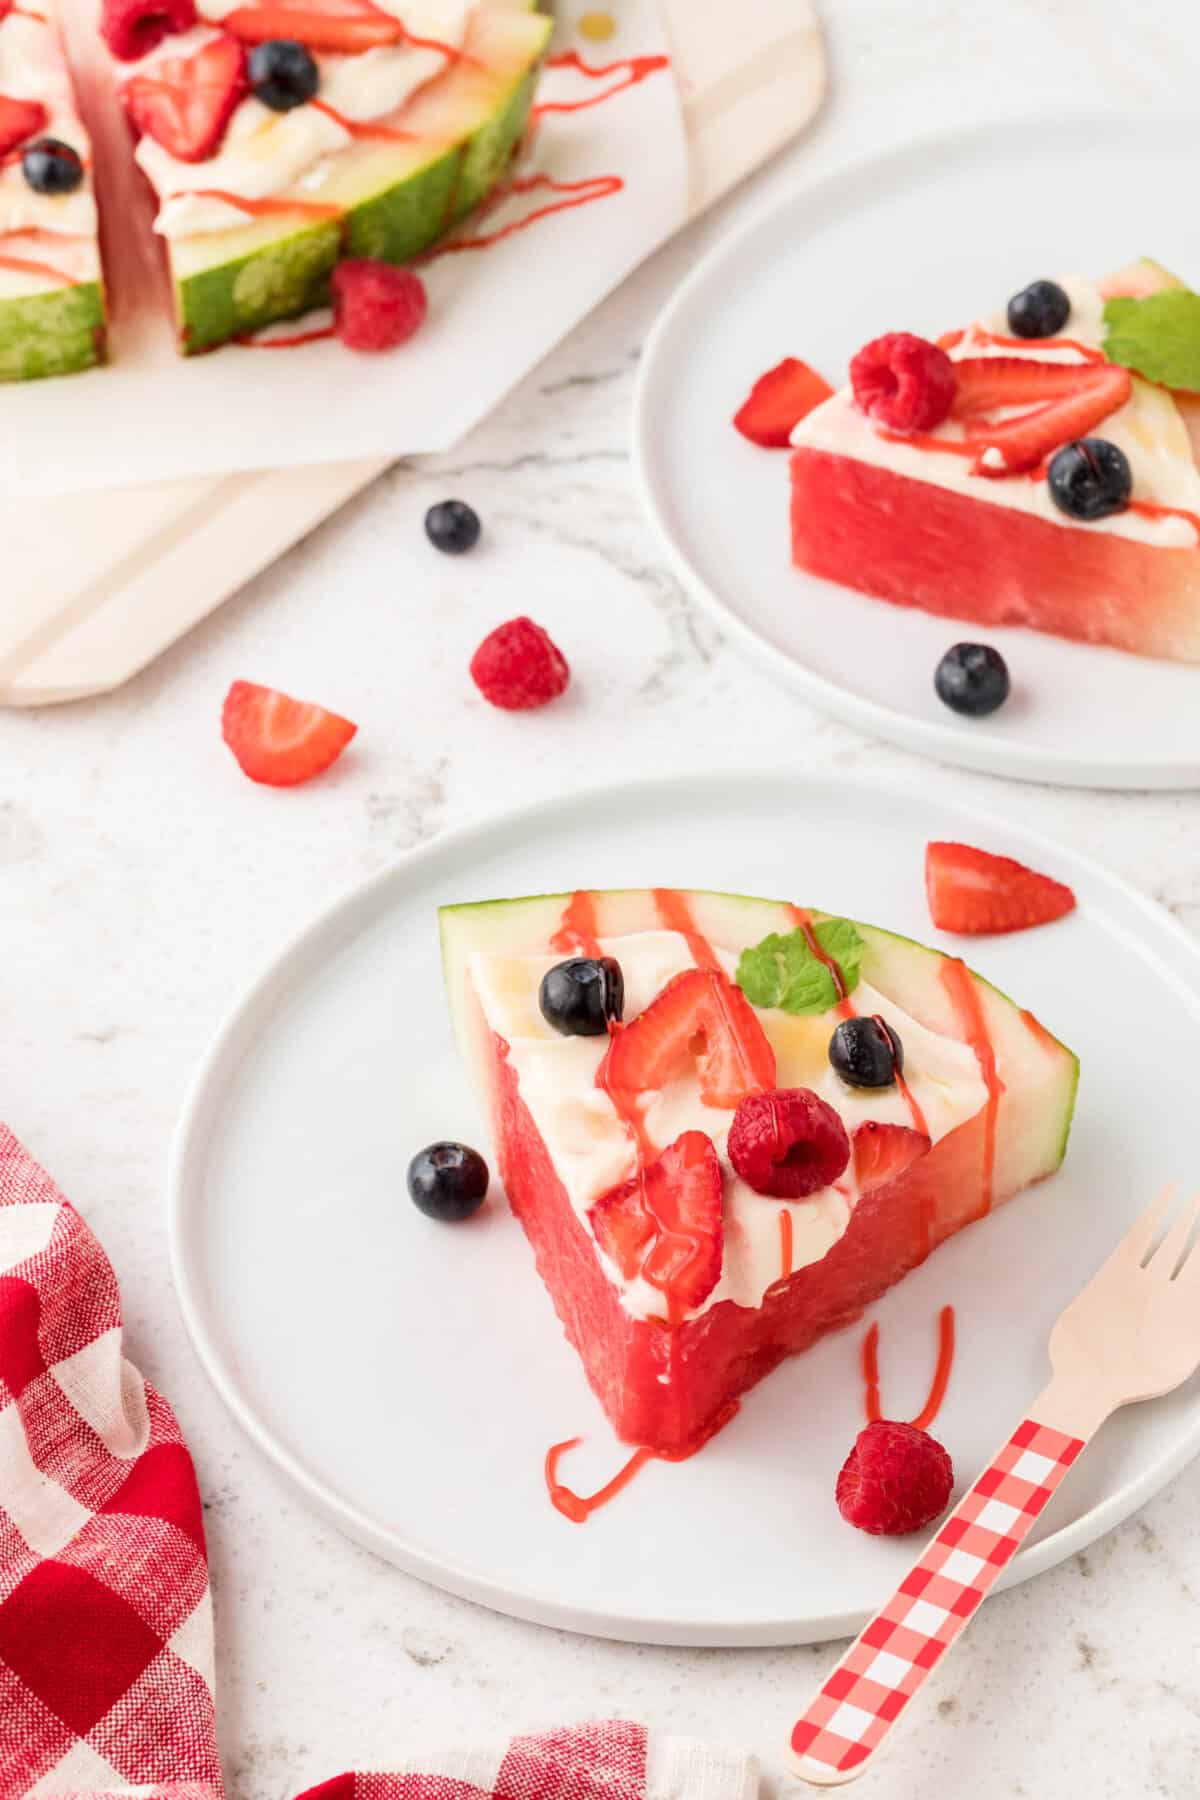 A slice of watermelon topped with whipped cream, fresh berries, and a strawberry drizzle on a serving plate.